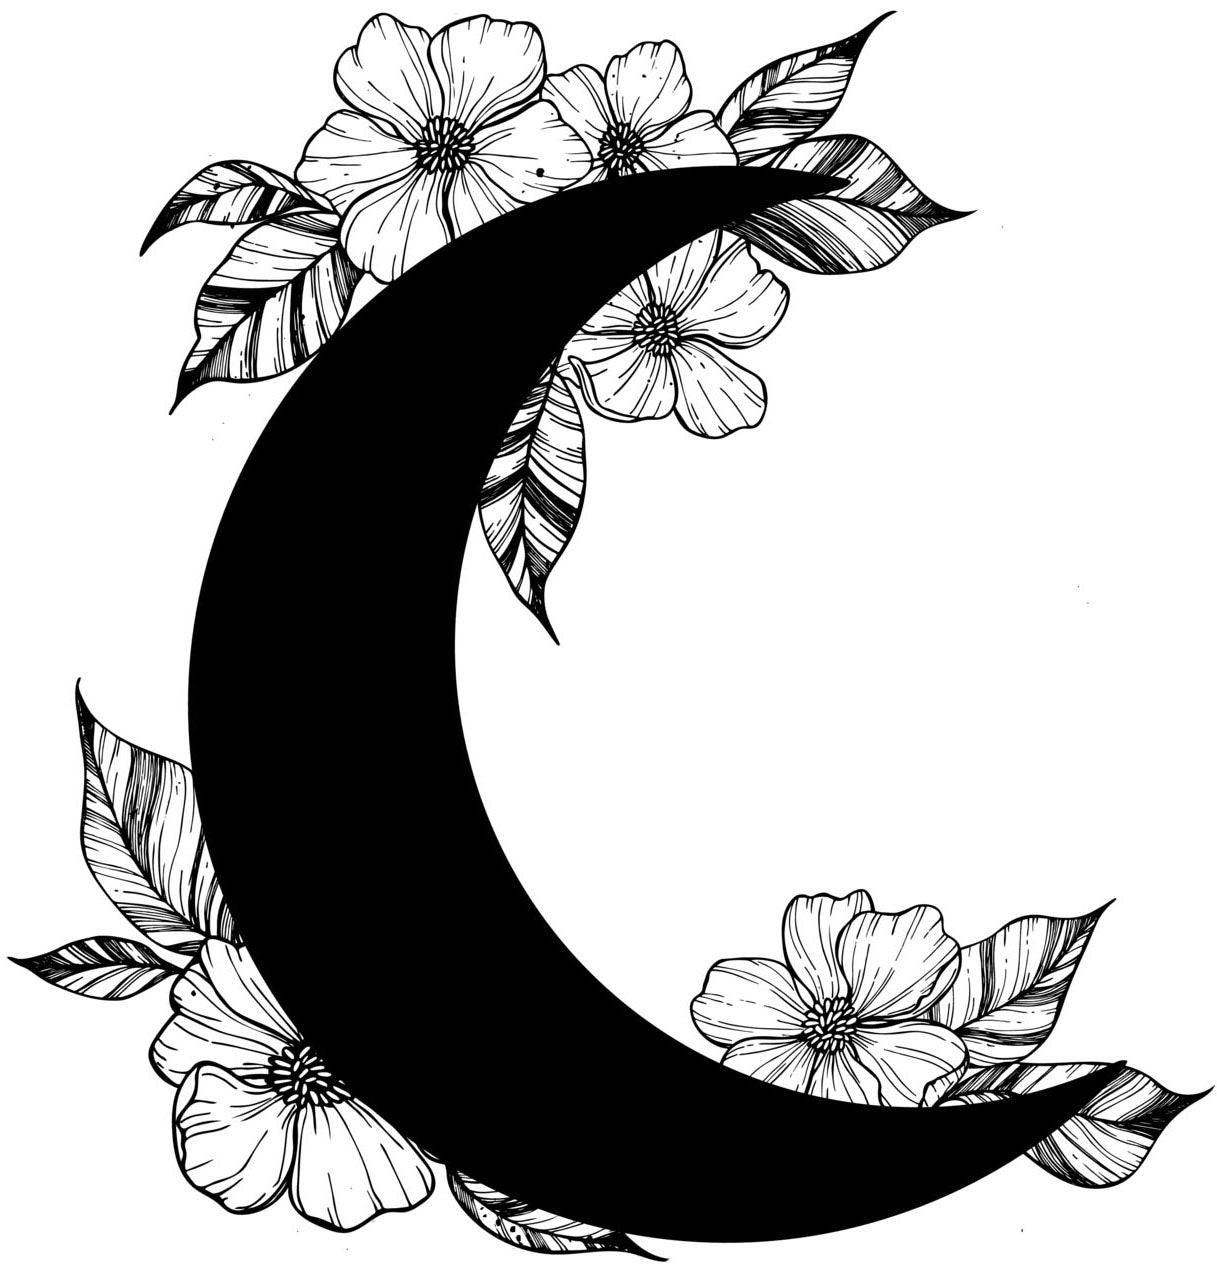 Crescent Moon with Dainty Black and White Flowers Vinyl Decal Sticker